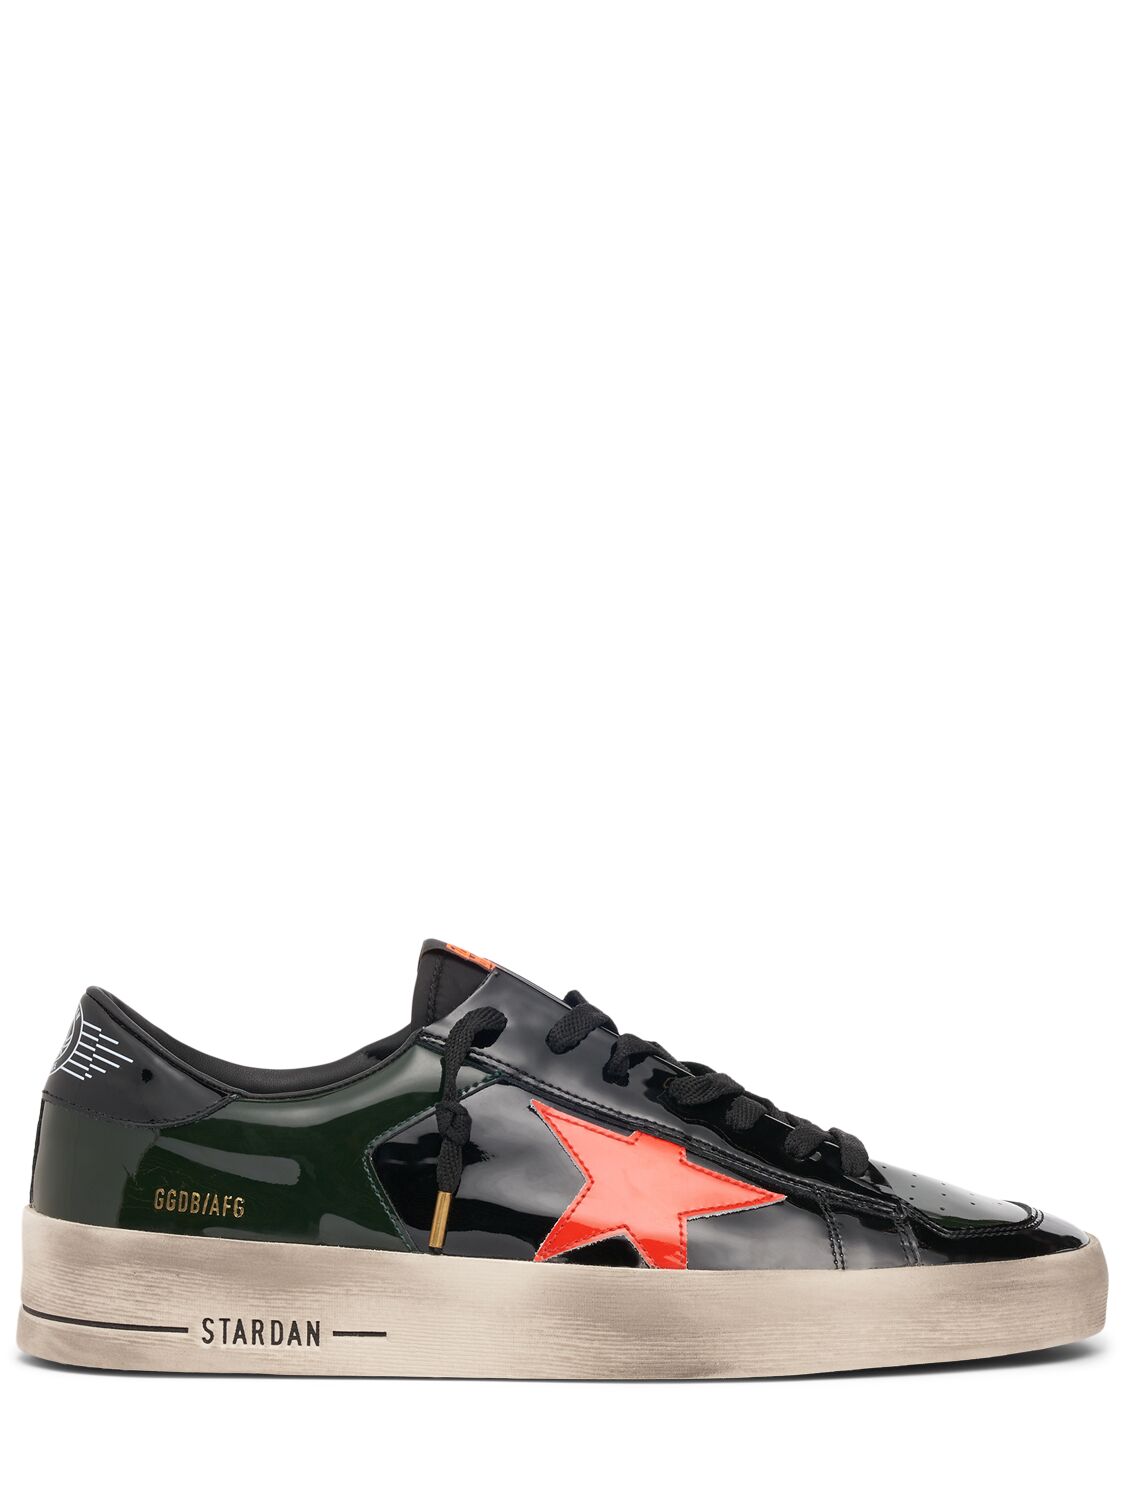 Image of Stardan Patent Leather Sneakers